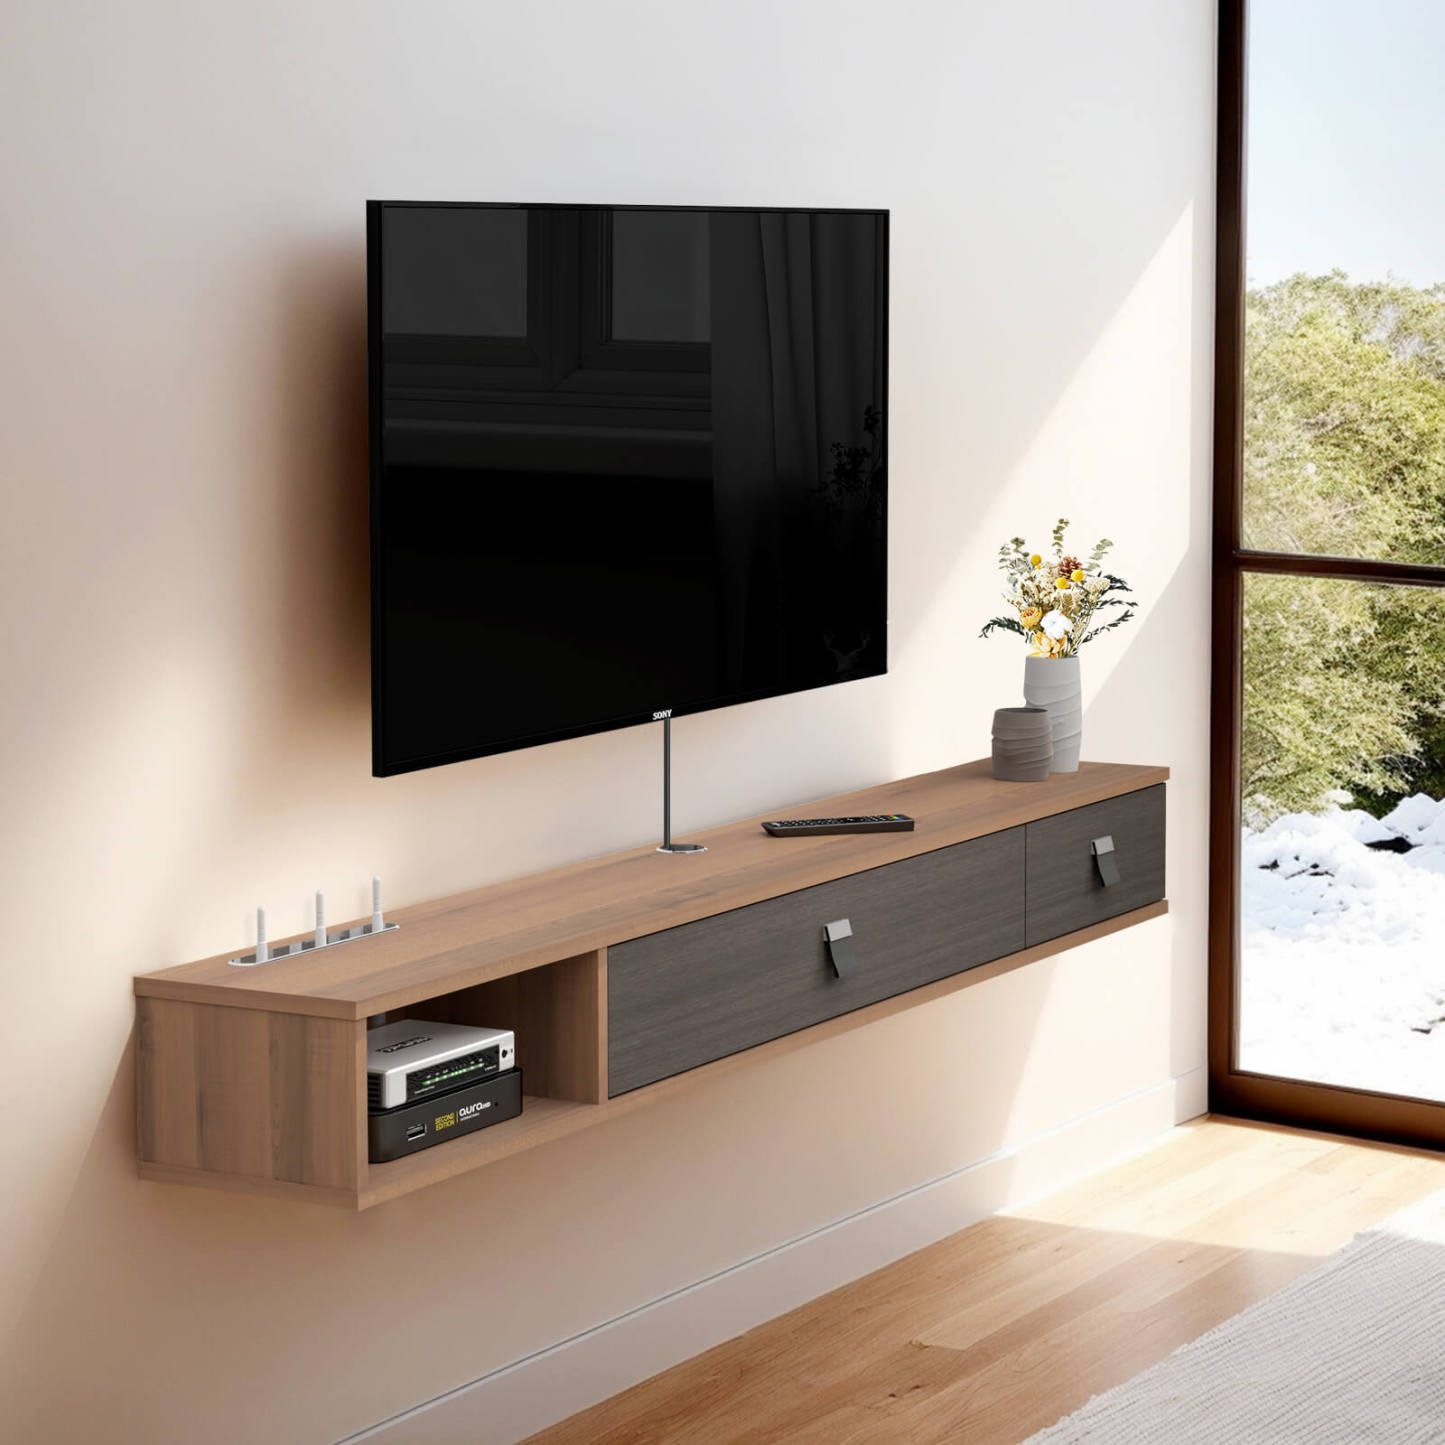 62.99" Plywood Floating TV Stand Wall Shelf with Two Doors for 65" 70" Televisions, Walnut